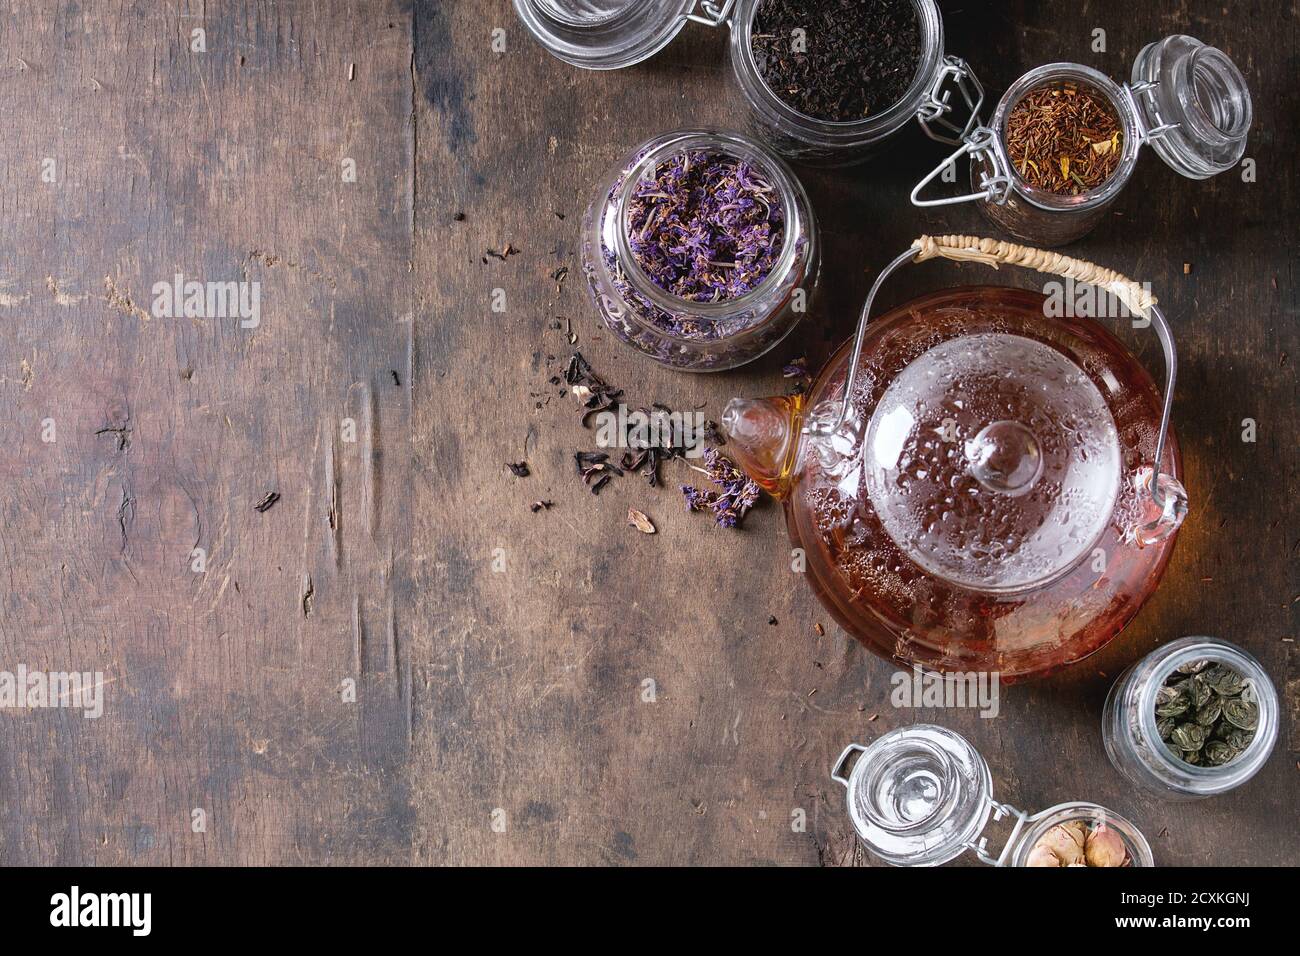 https://c8.alamy.com/comp/2CXKGNJ/variety-of-black-green-and-herbal-dry-tea-leaves-in-glass-jars-with-vintage-strainer-and-teapot-of-hot-tea-over-old-dark-wooden-background-top-view-2CXKGNJ.jpg